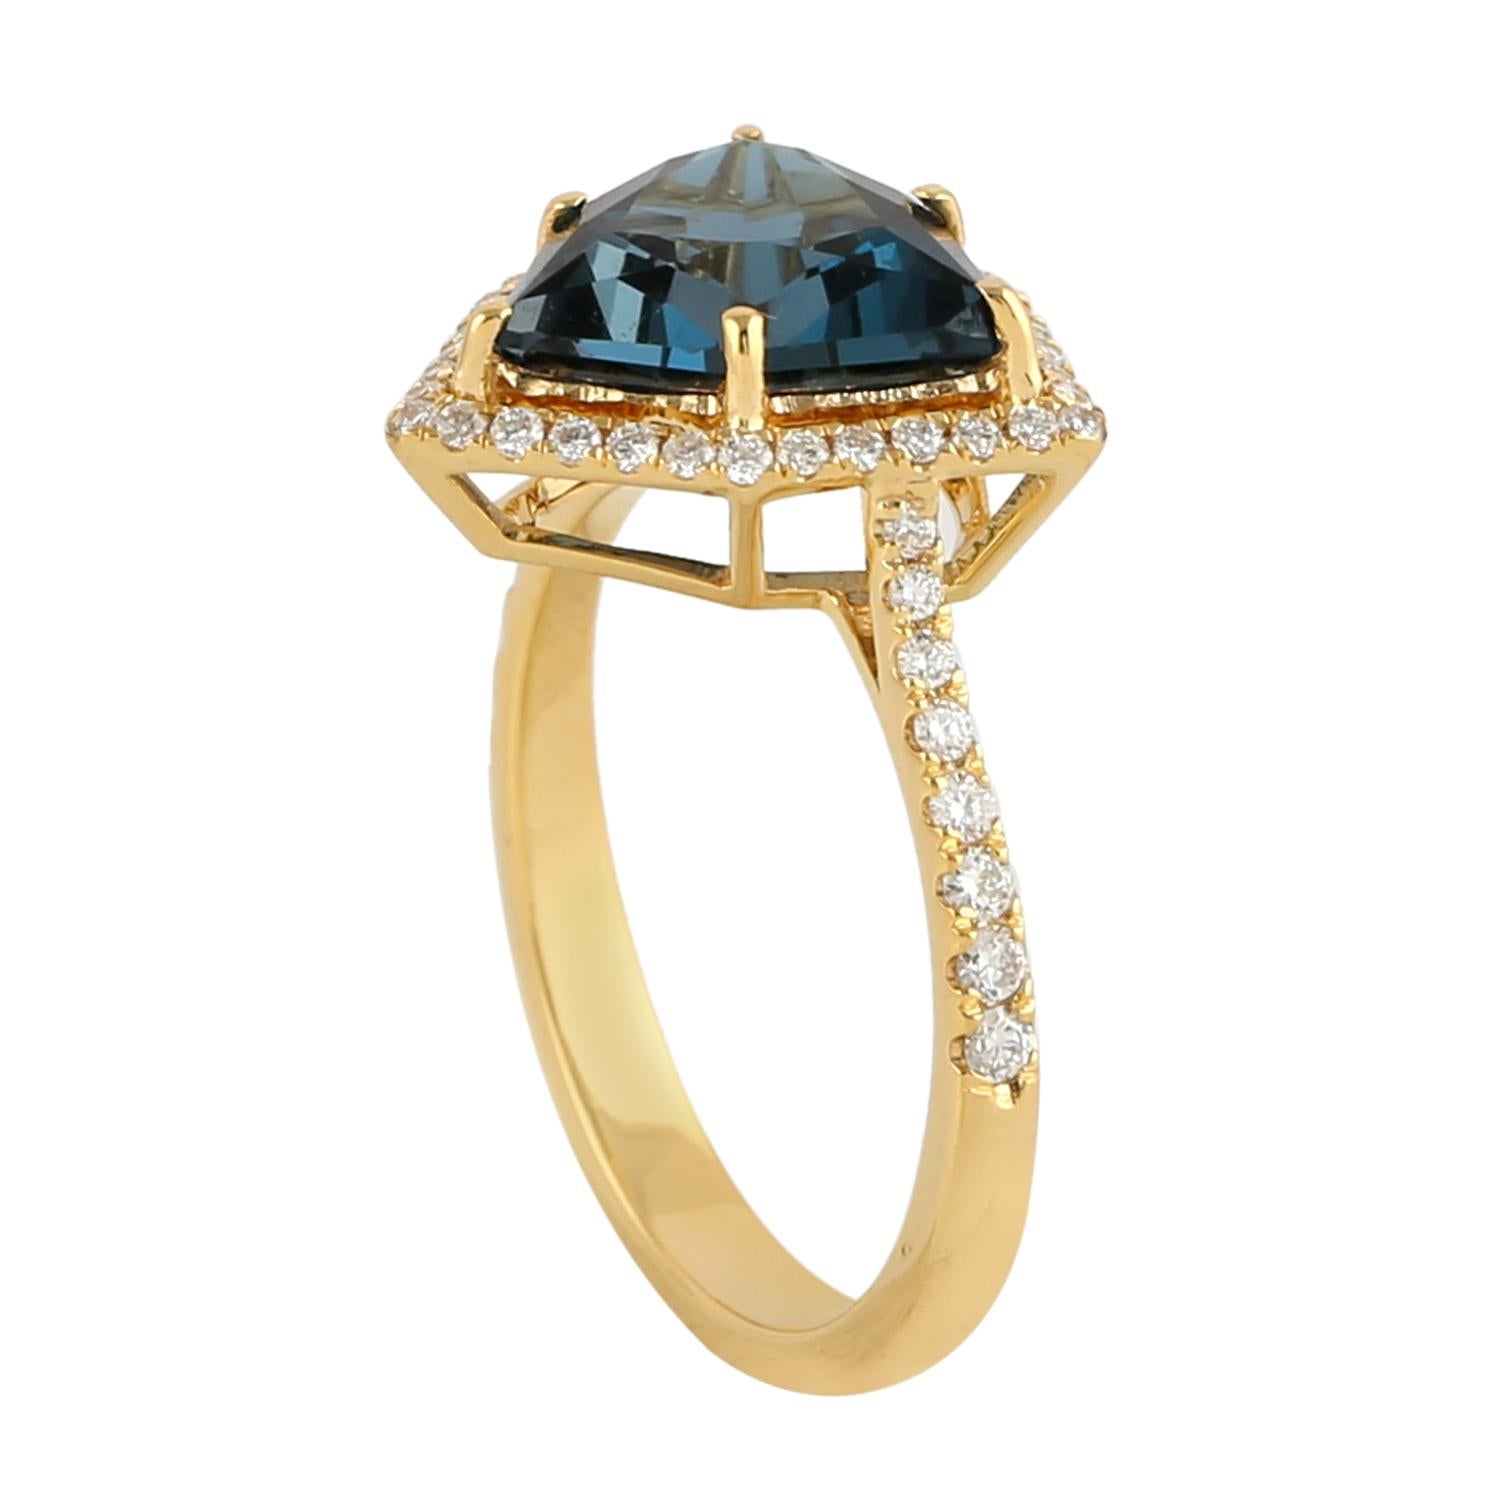 This ring is crafted in 14K gold, 3.96 carats blue topaz and .38 carat diamonds. Also available matching pendant necklace.

FOLLOW  MEGHNA JEWELS storefront to view the latest collection & exclusive pieces.  Meghna Jewels is proudly rated as a Top